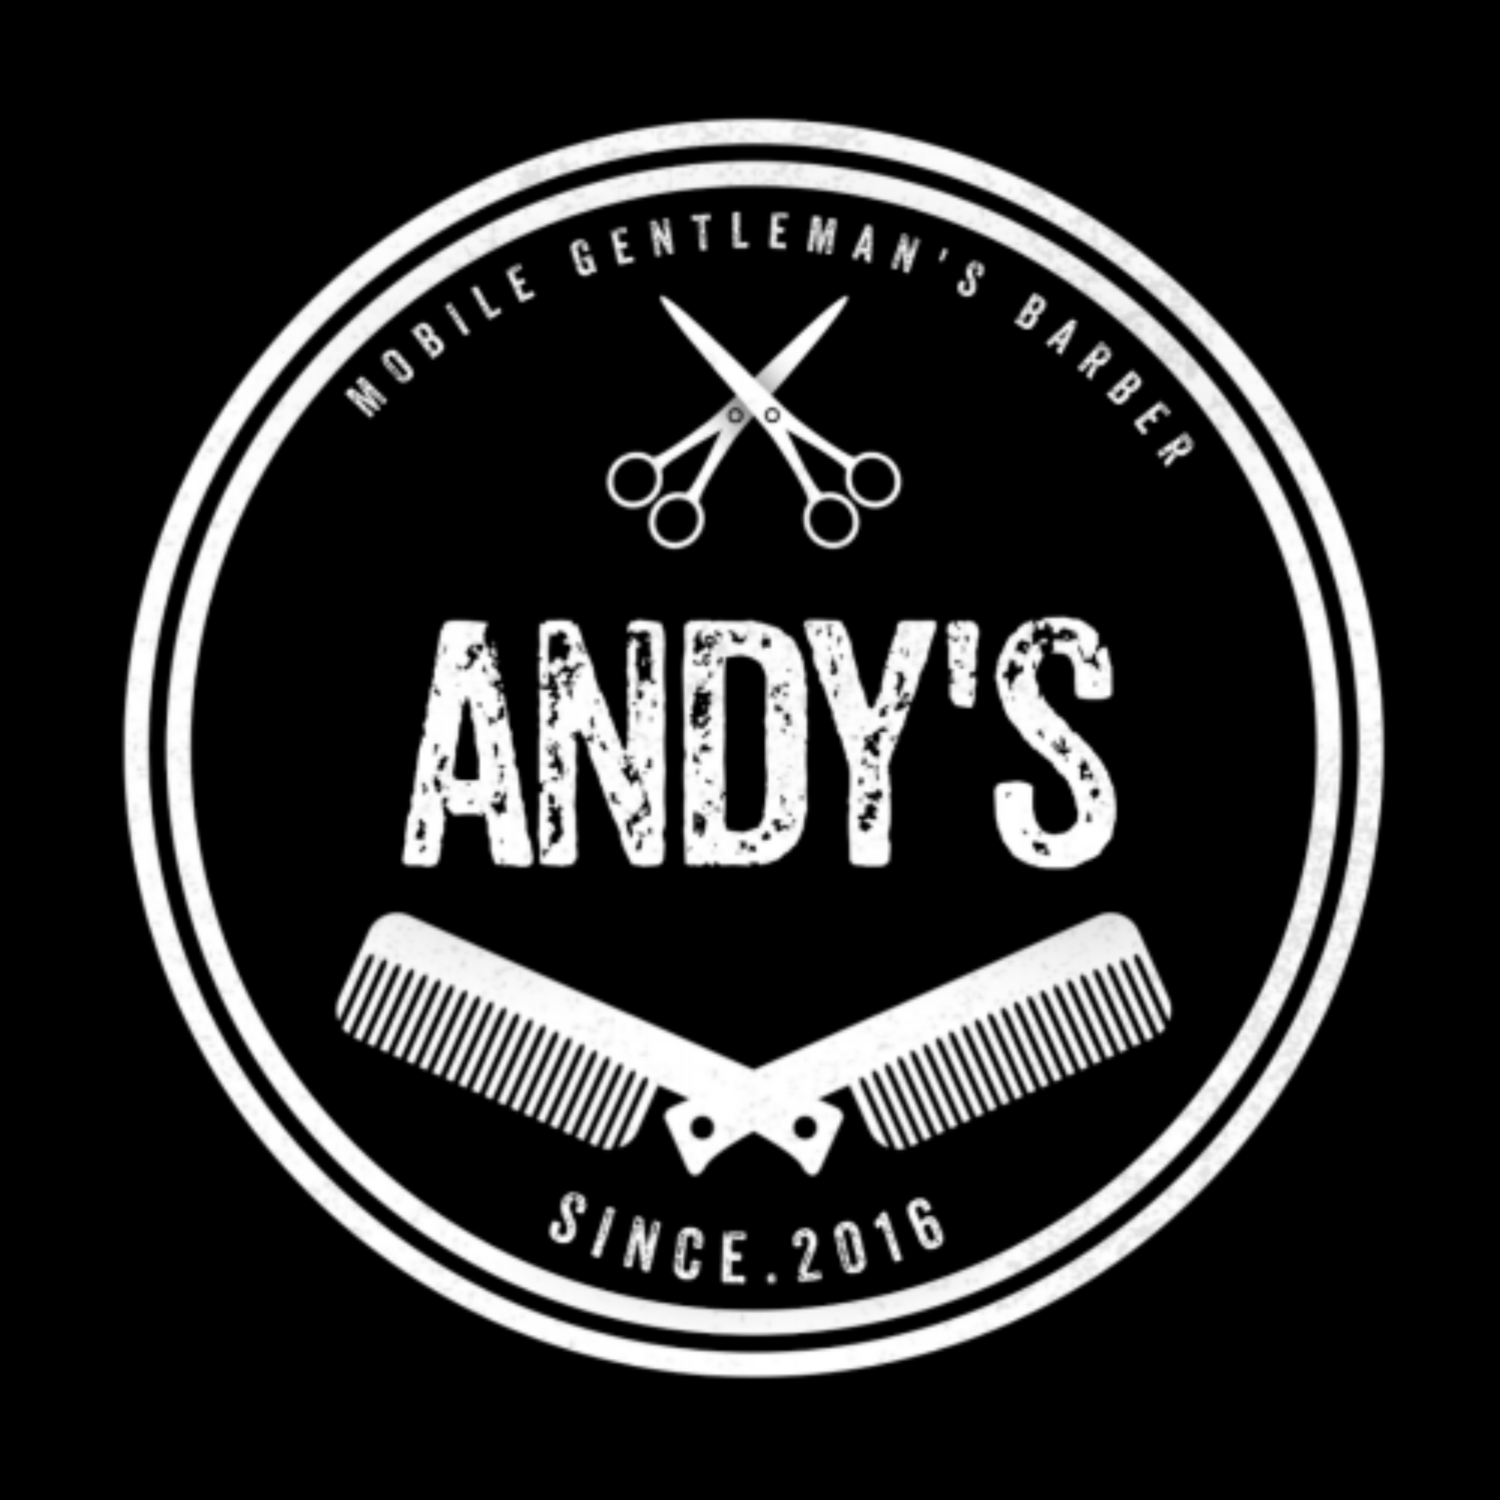 Andy's Mobile Barbers - Biggleswade, Sandy, St Neots and surrounding areas. Bedfordshire, Cambridgeshire, Hertfordshire.